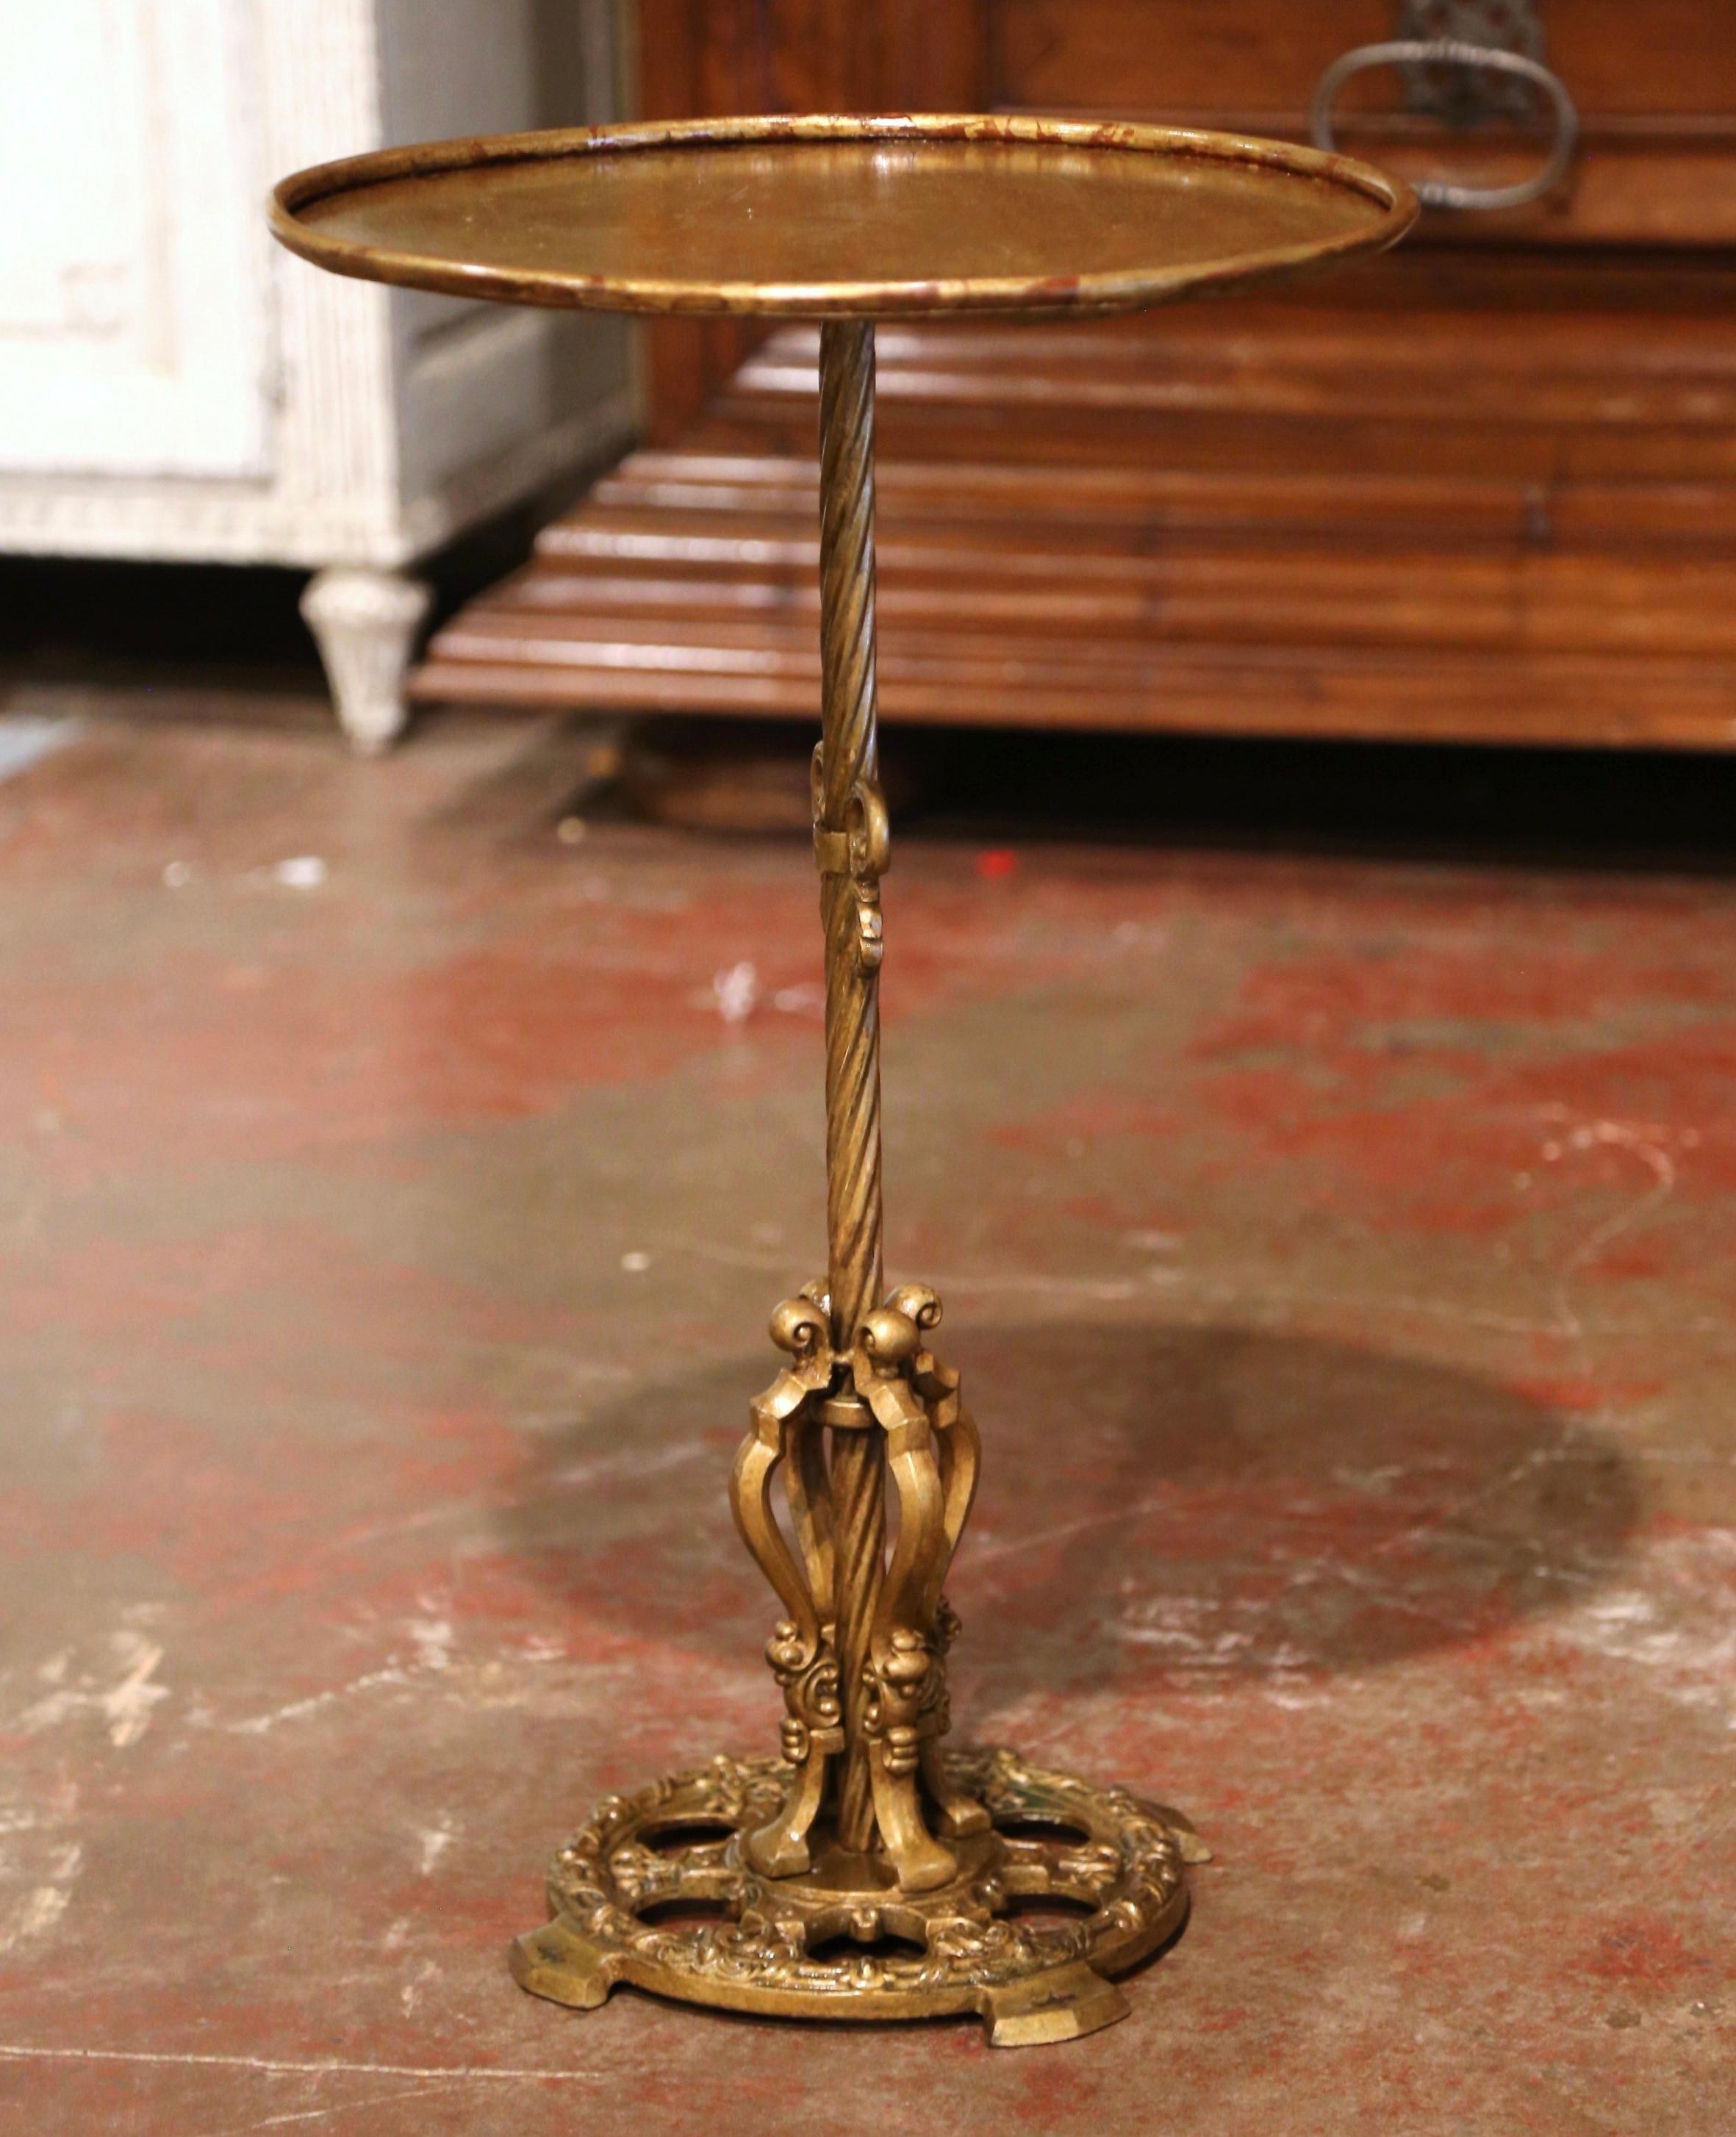 This elegant, antique pedestal table was crafted in Southern France, circa 1920. The martini table features a forged central pedestal stem embellished with a central decor, over an intricate flat round base decorated with leaf motifs. The serving